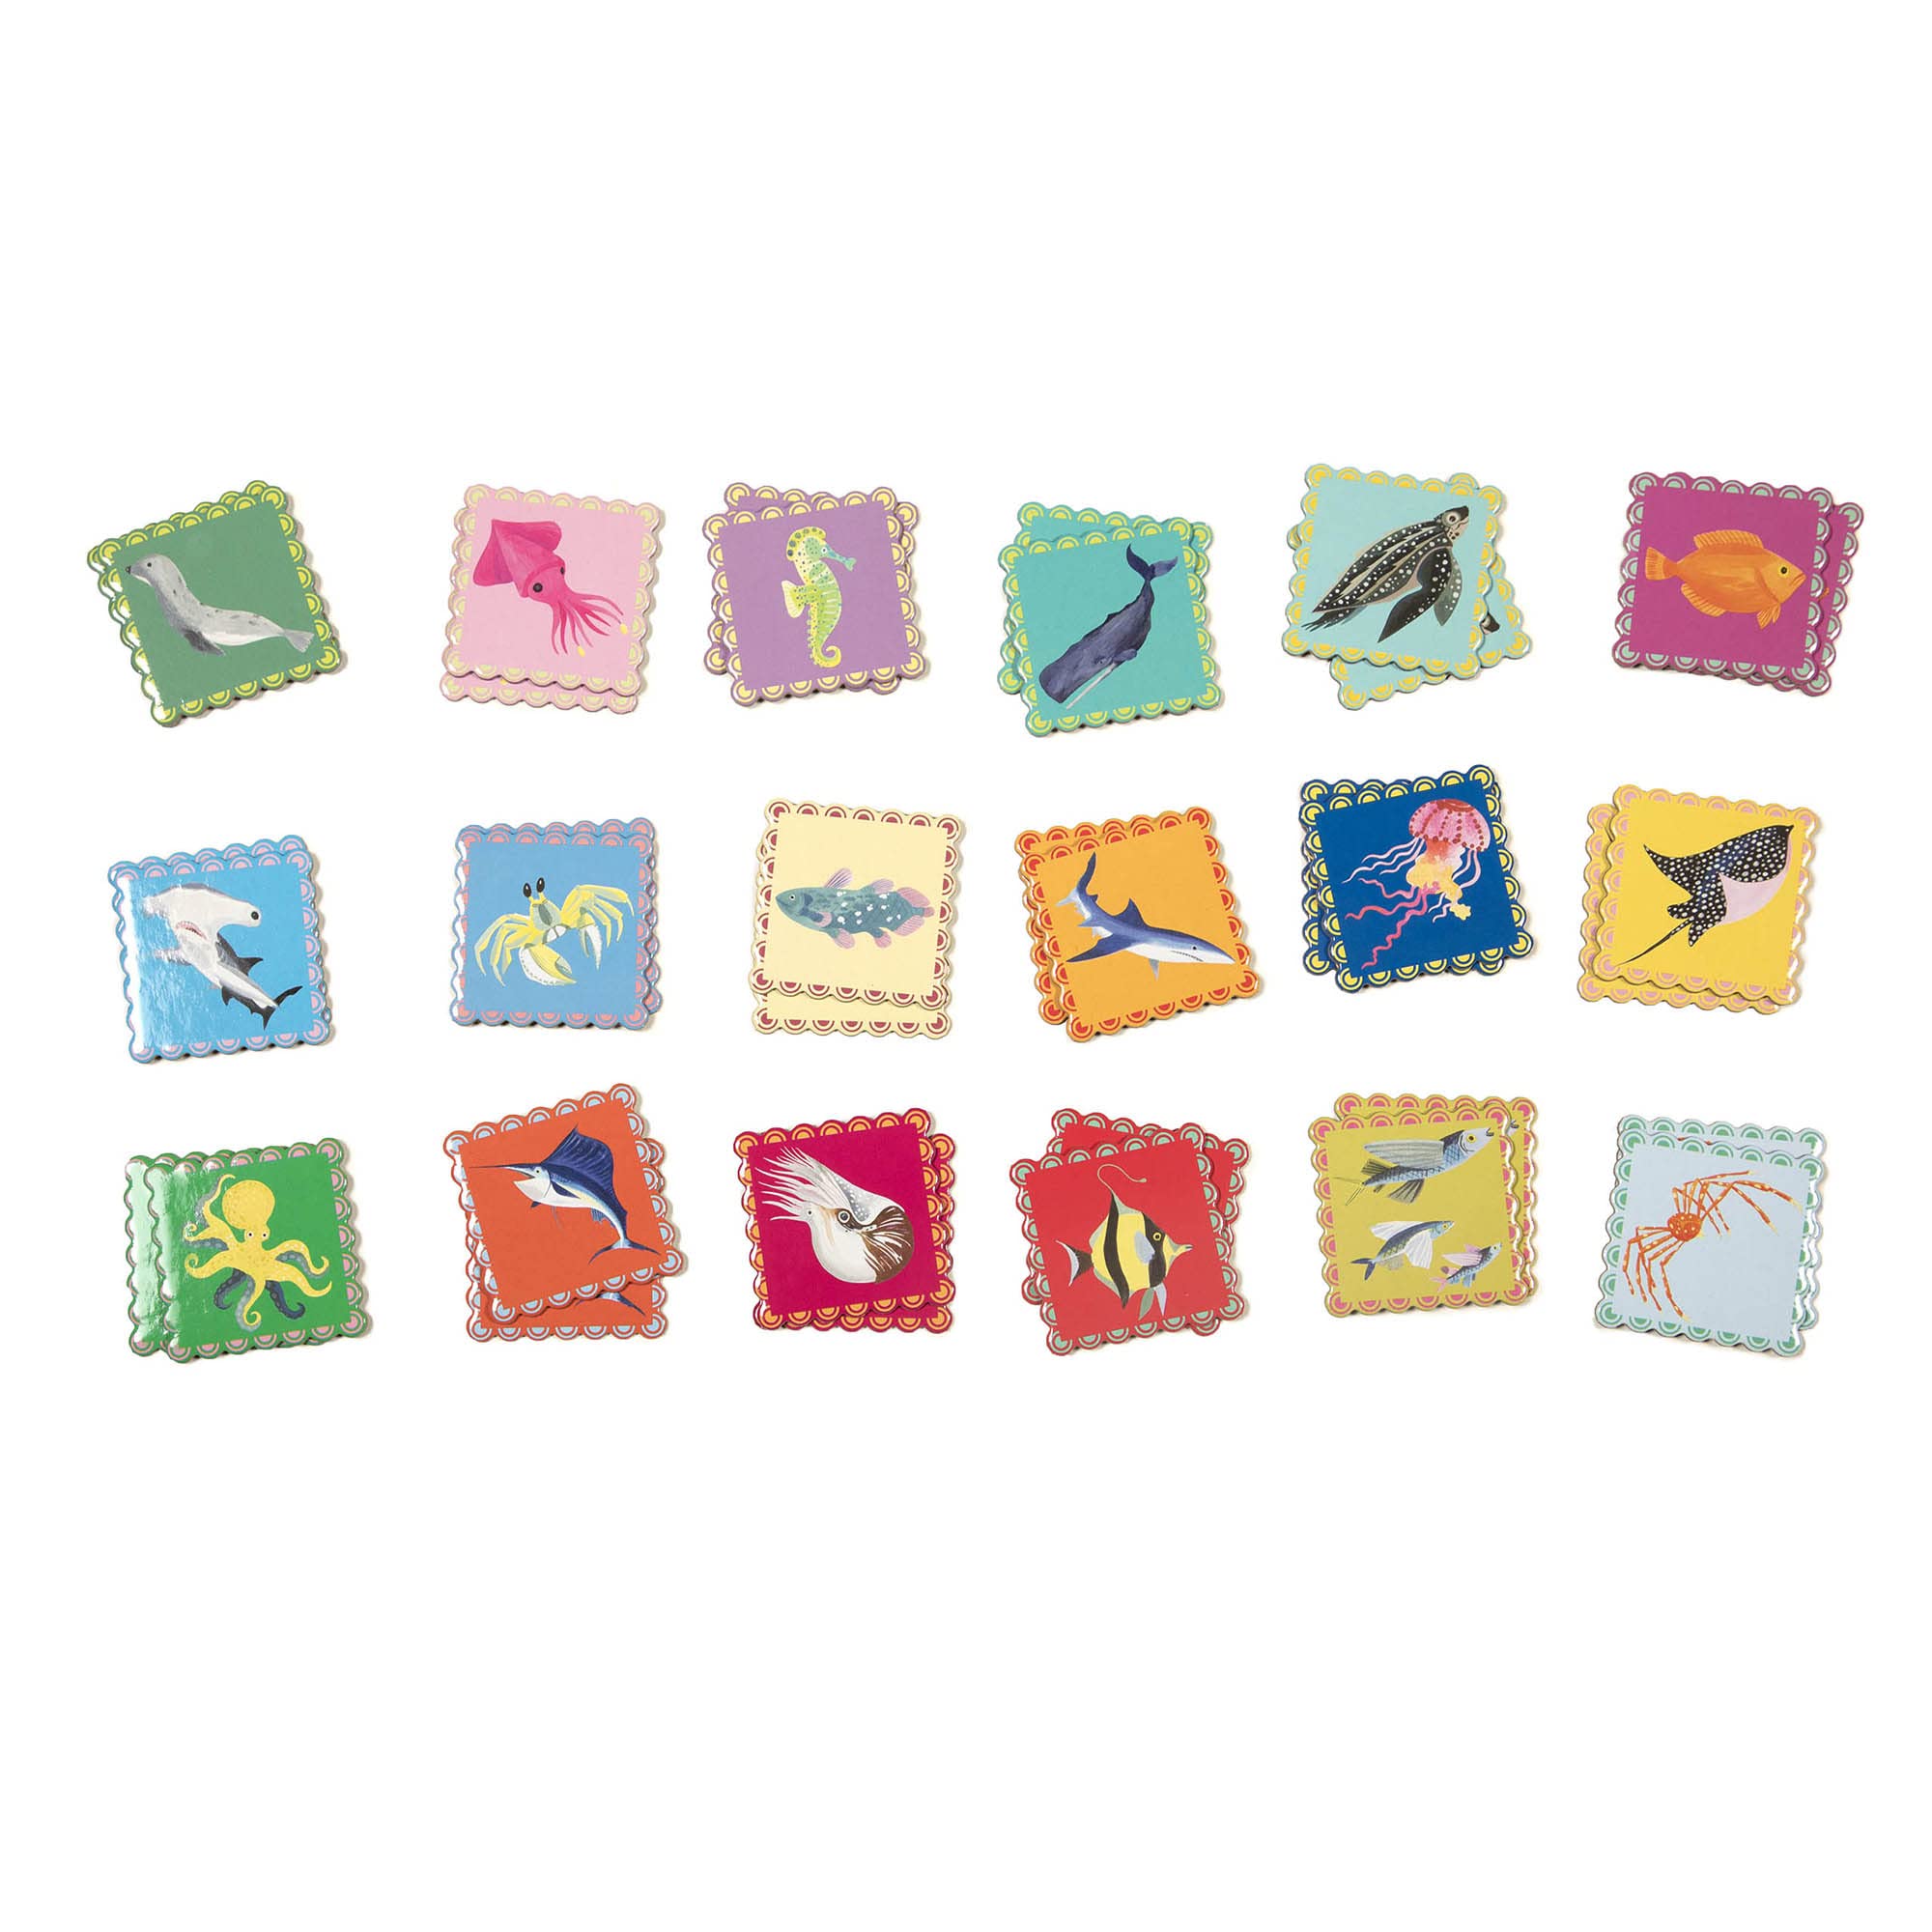 eeBoo: Sea Little Square Memory & Matching Game, Developmental and Educational Fun, Builds Recognition and Memory Skills, For Ages 3 and up